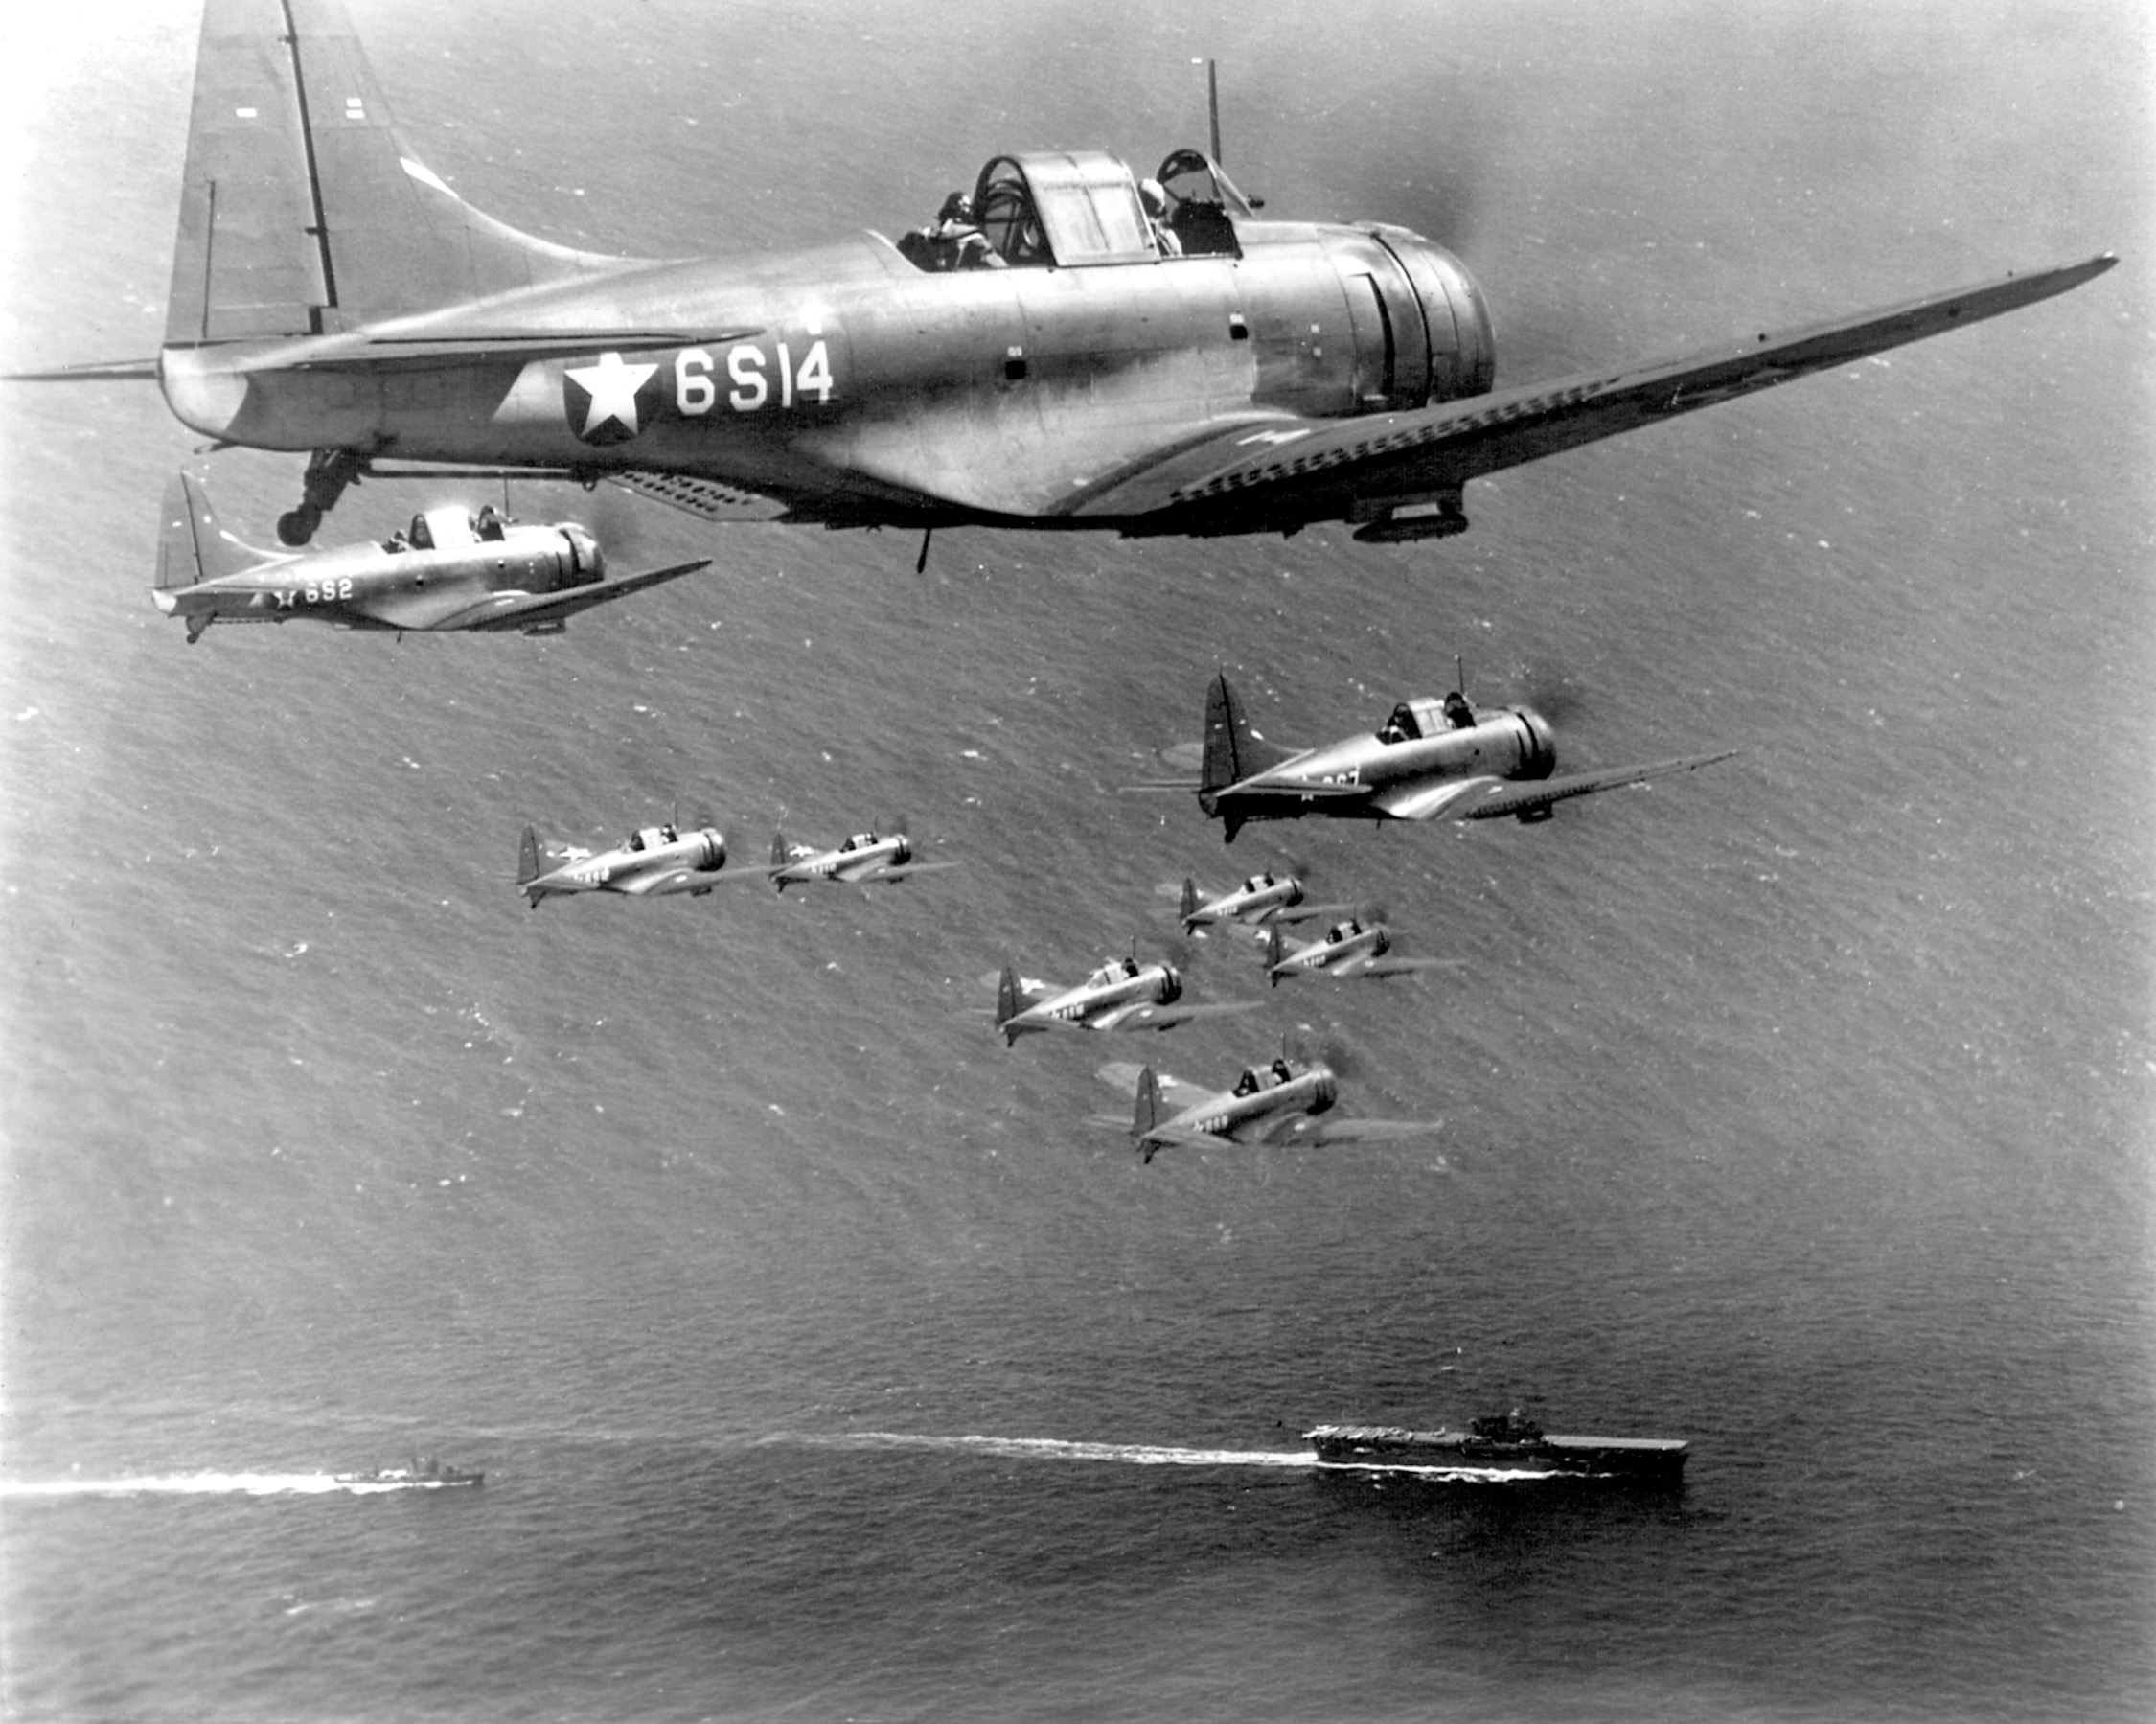 Flying in formation, a squad of Dauntless dive-bombers from Scout Squadron Six return to the USS Enterprise.